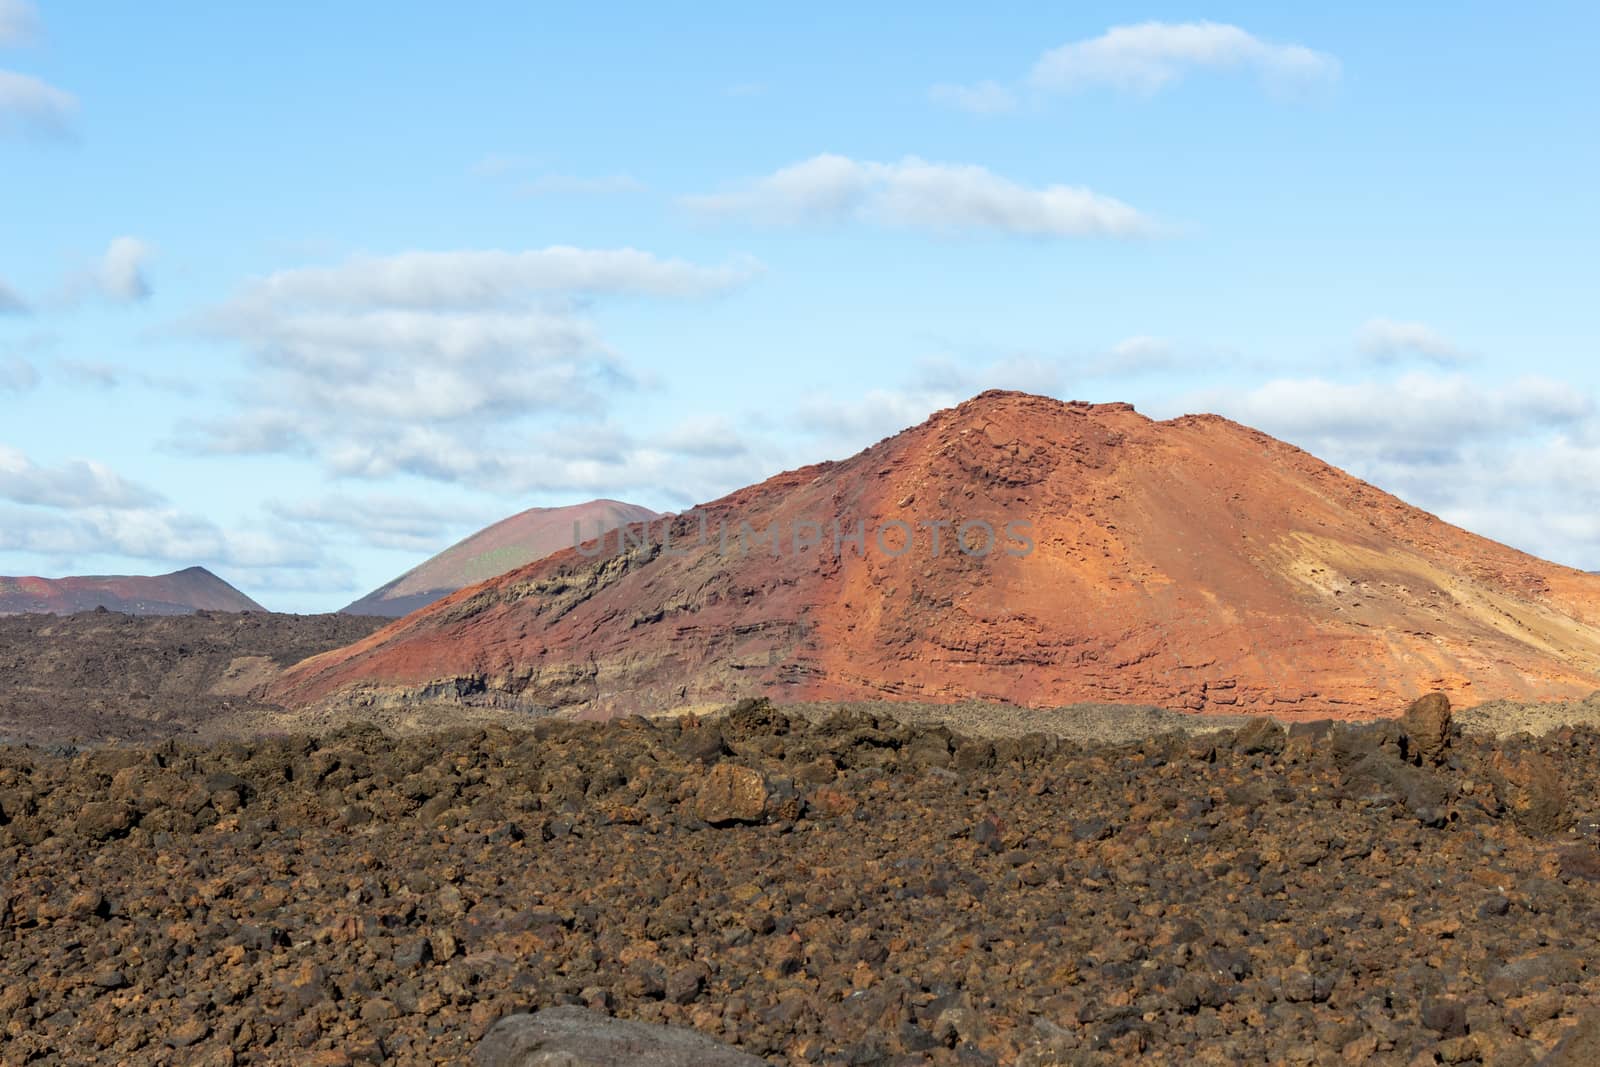 Volcanic landscape with lava field in the foreground and mountain range with different red and brown colours in the background on canary island Lanzarote, Spain